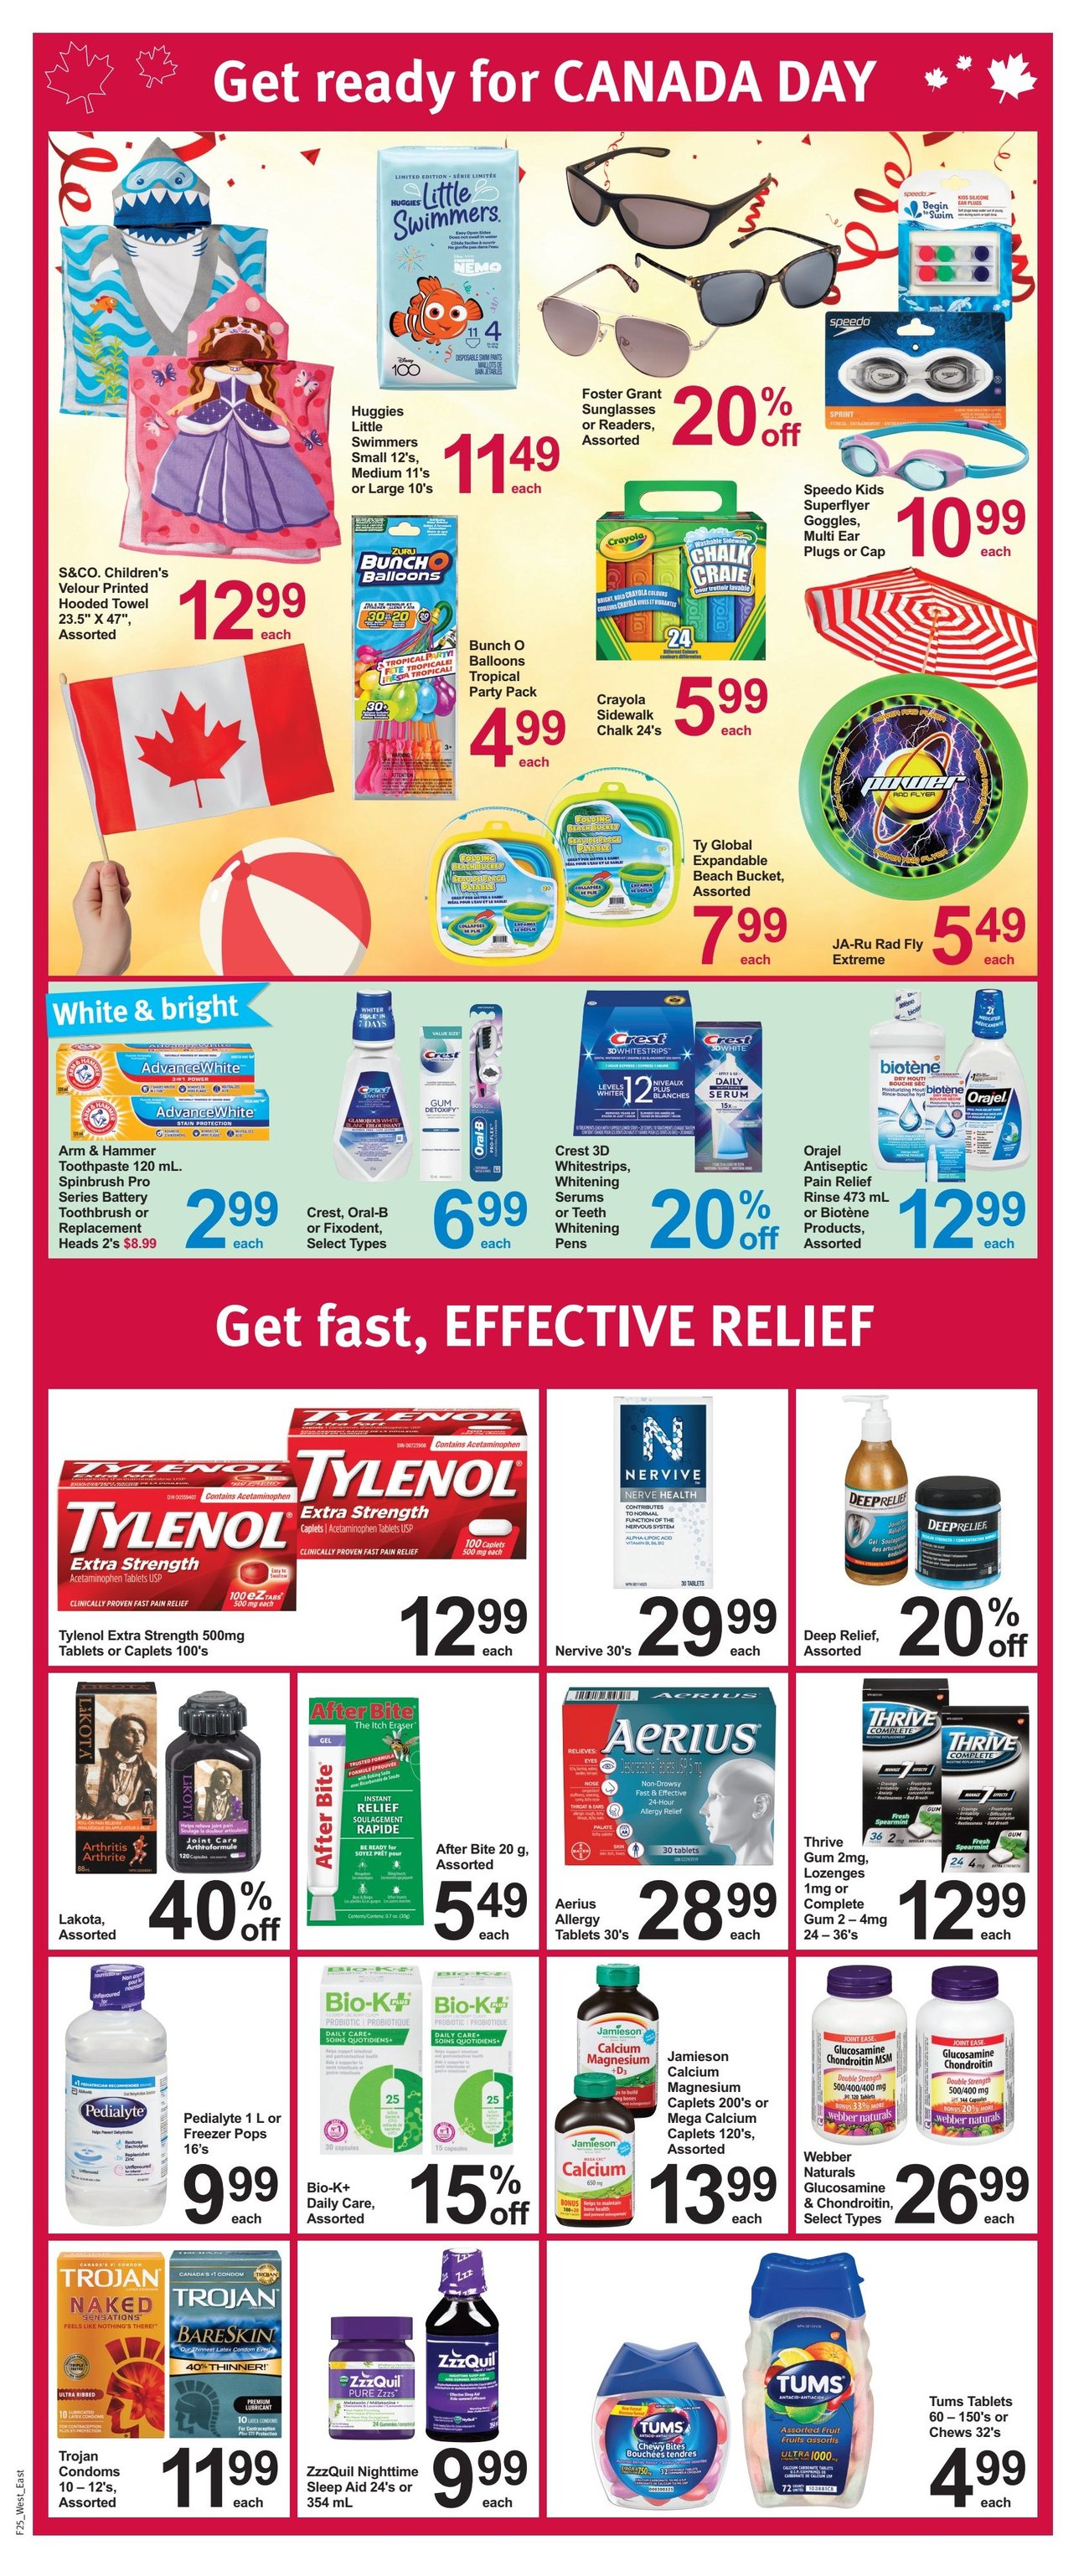 Pharmasave - Ontario - Weekly Flyer Specials - Page 3